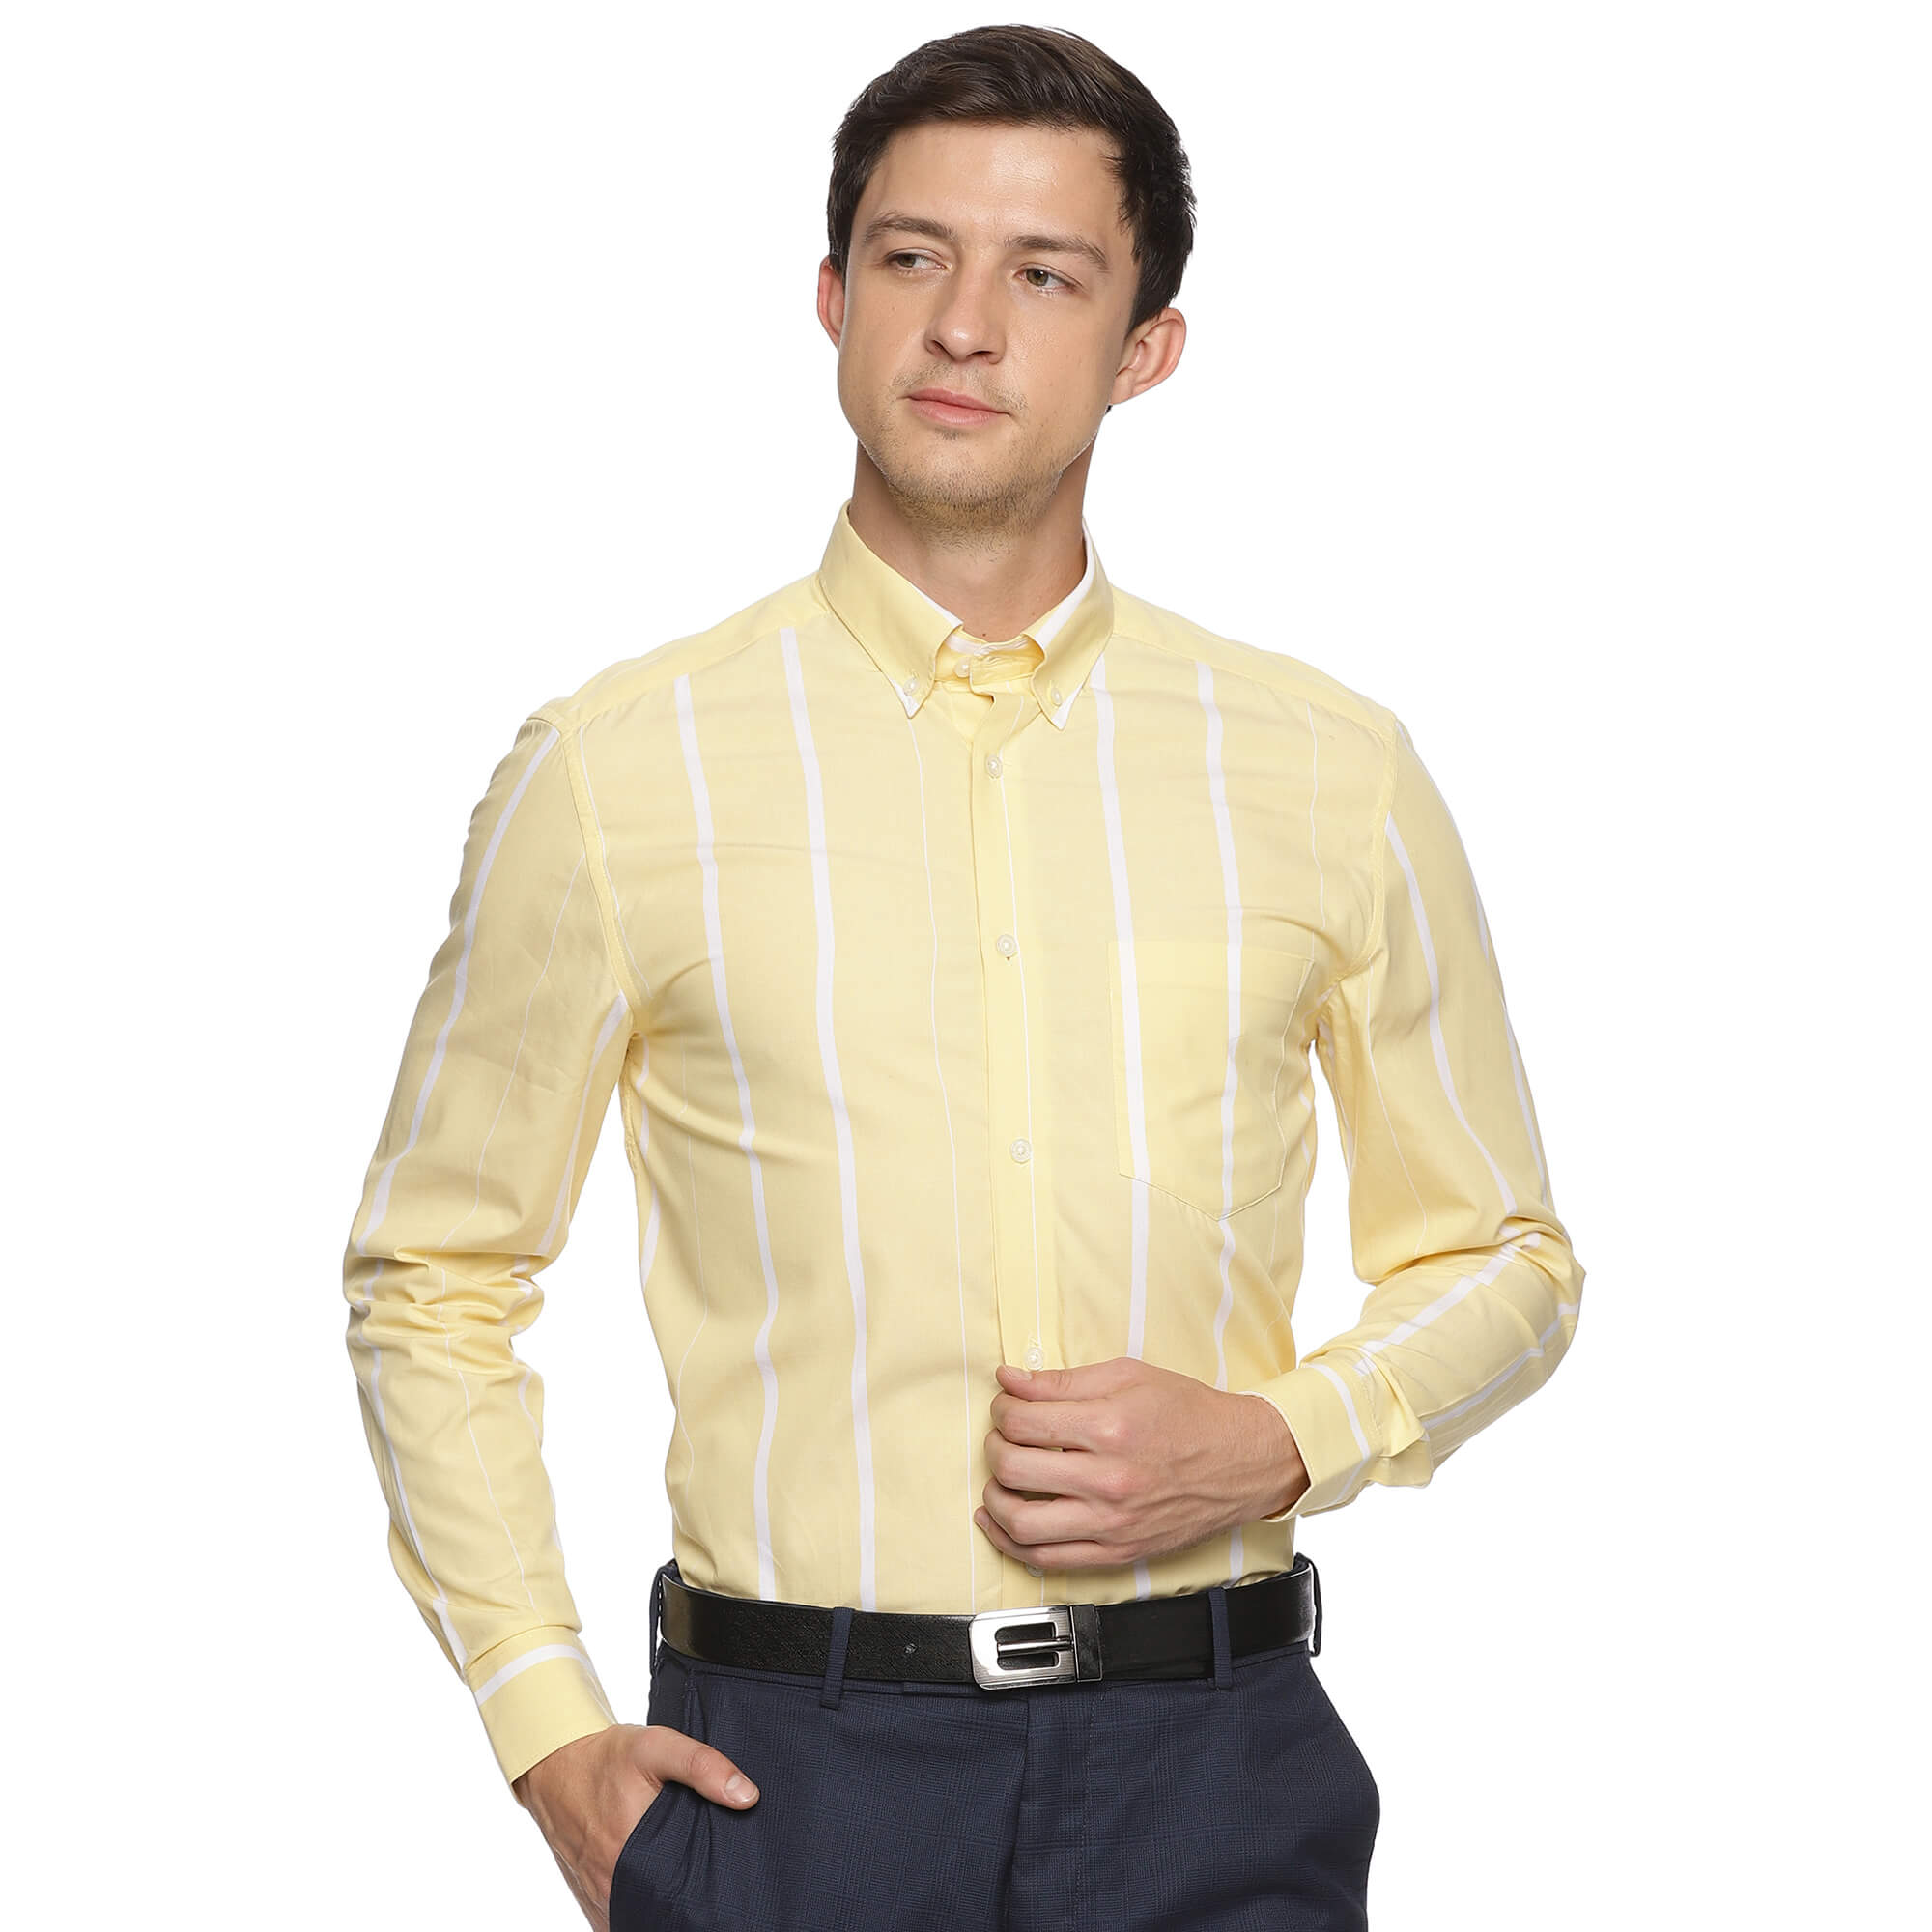 Skyline Cotton Stripes Shirt In Yellow & White - The Formal Club